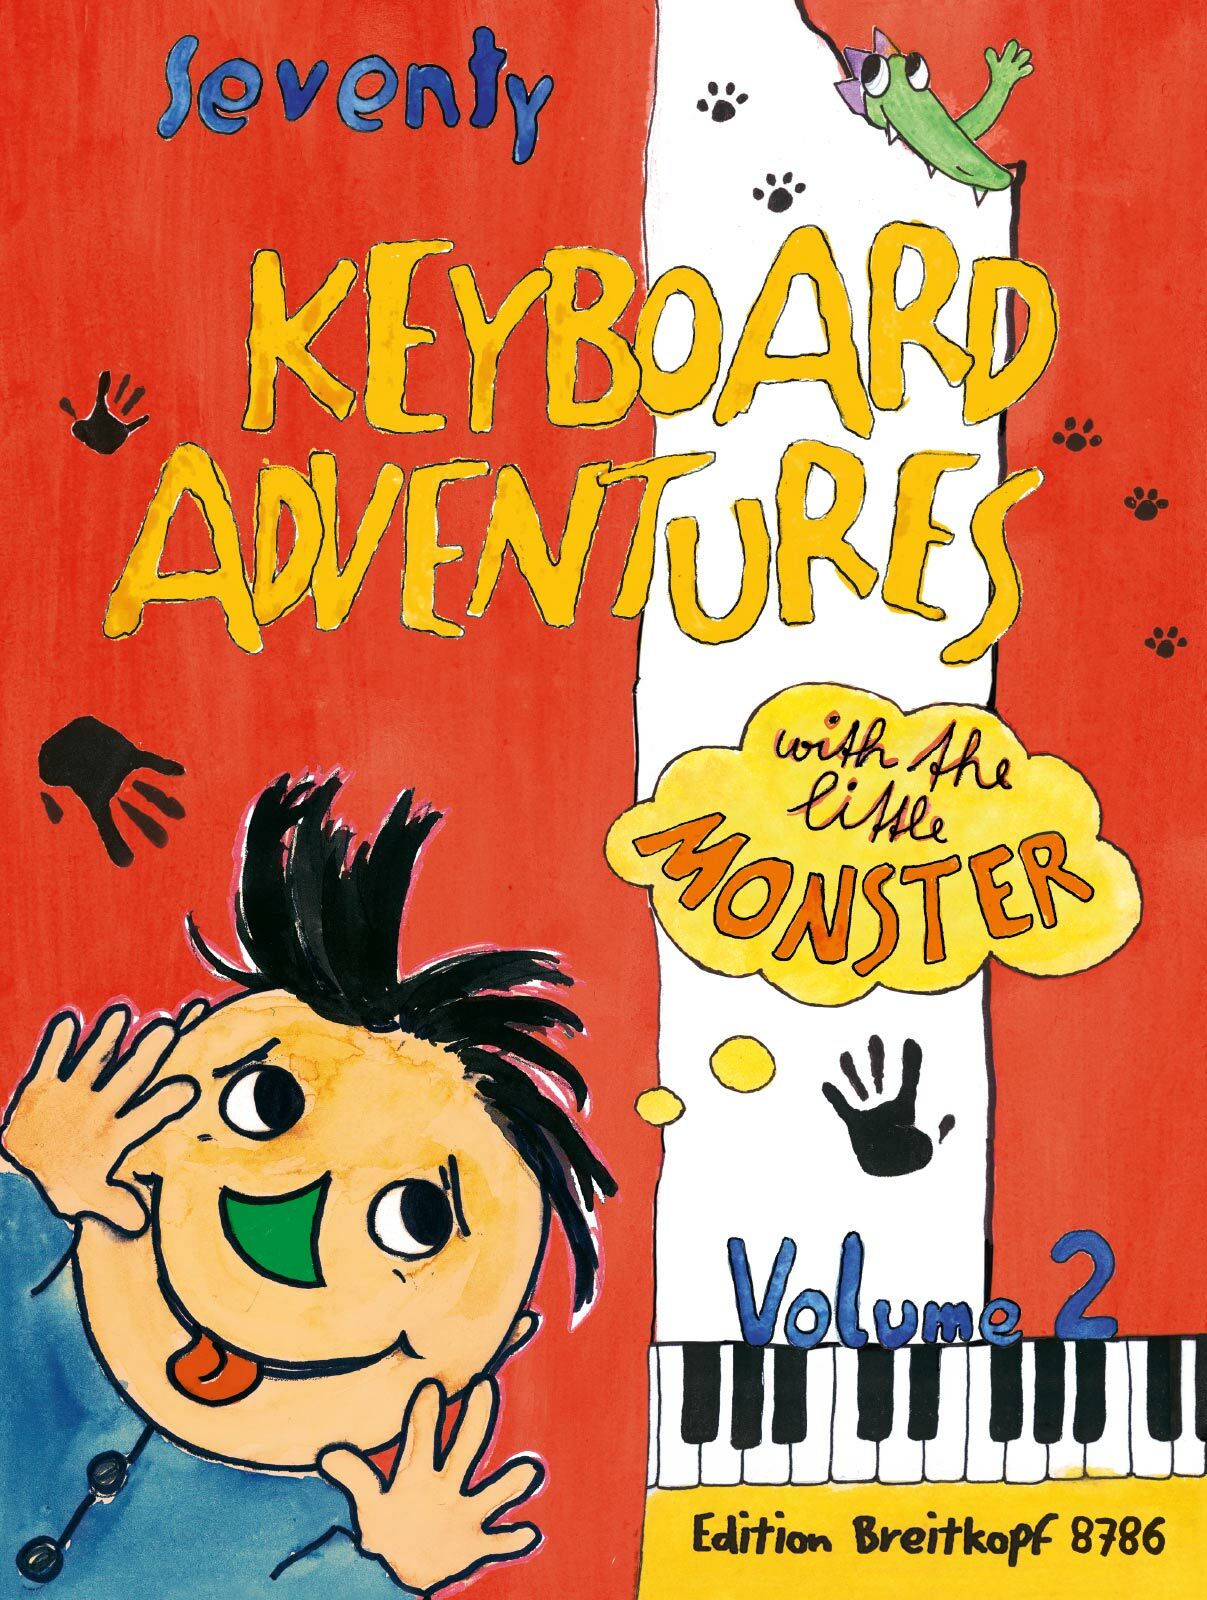 70 Keyboard Adventures with the Little Monster - Volume 2